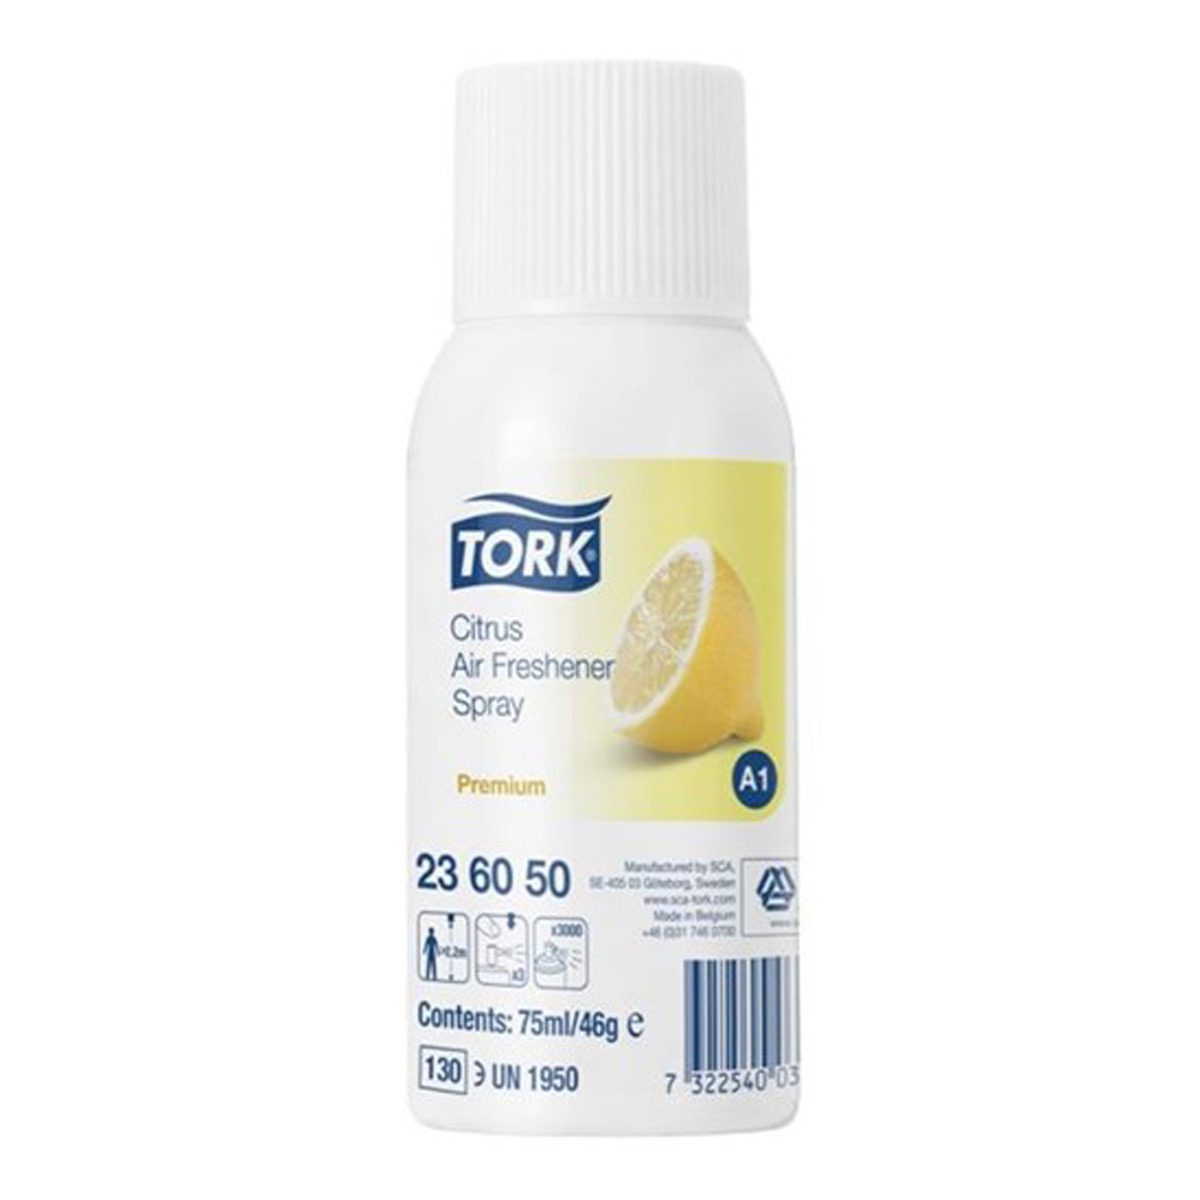 cleaning-products-odour-pest-tork-citrus-air-freshener-spray-75ml-premium-control-odours-effectively-efficiently-concentrated-fragrance-oils-vjs-distributors-236050